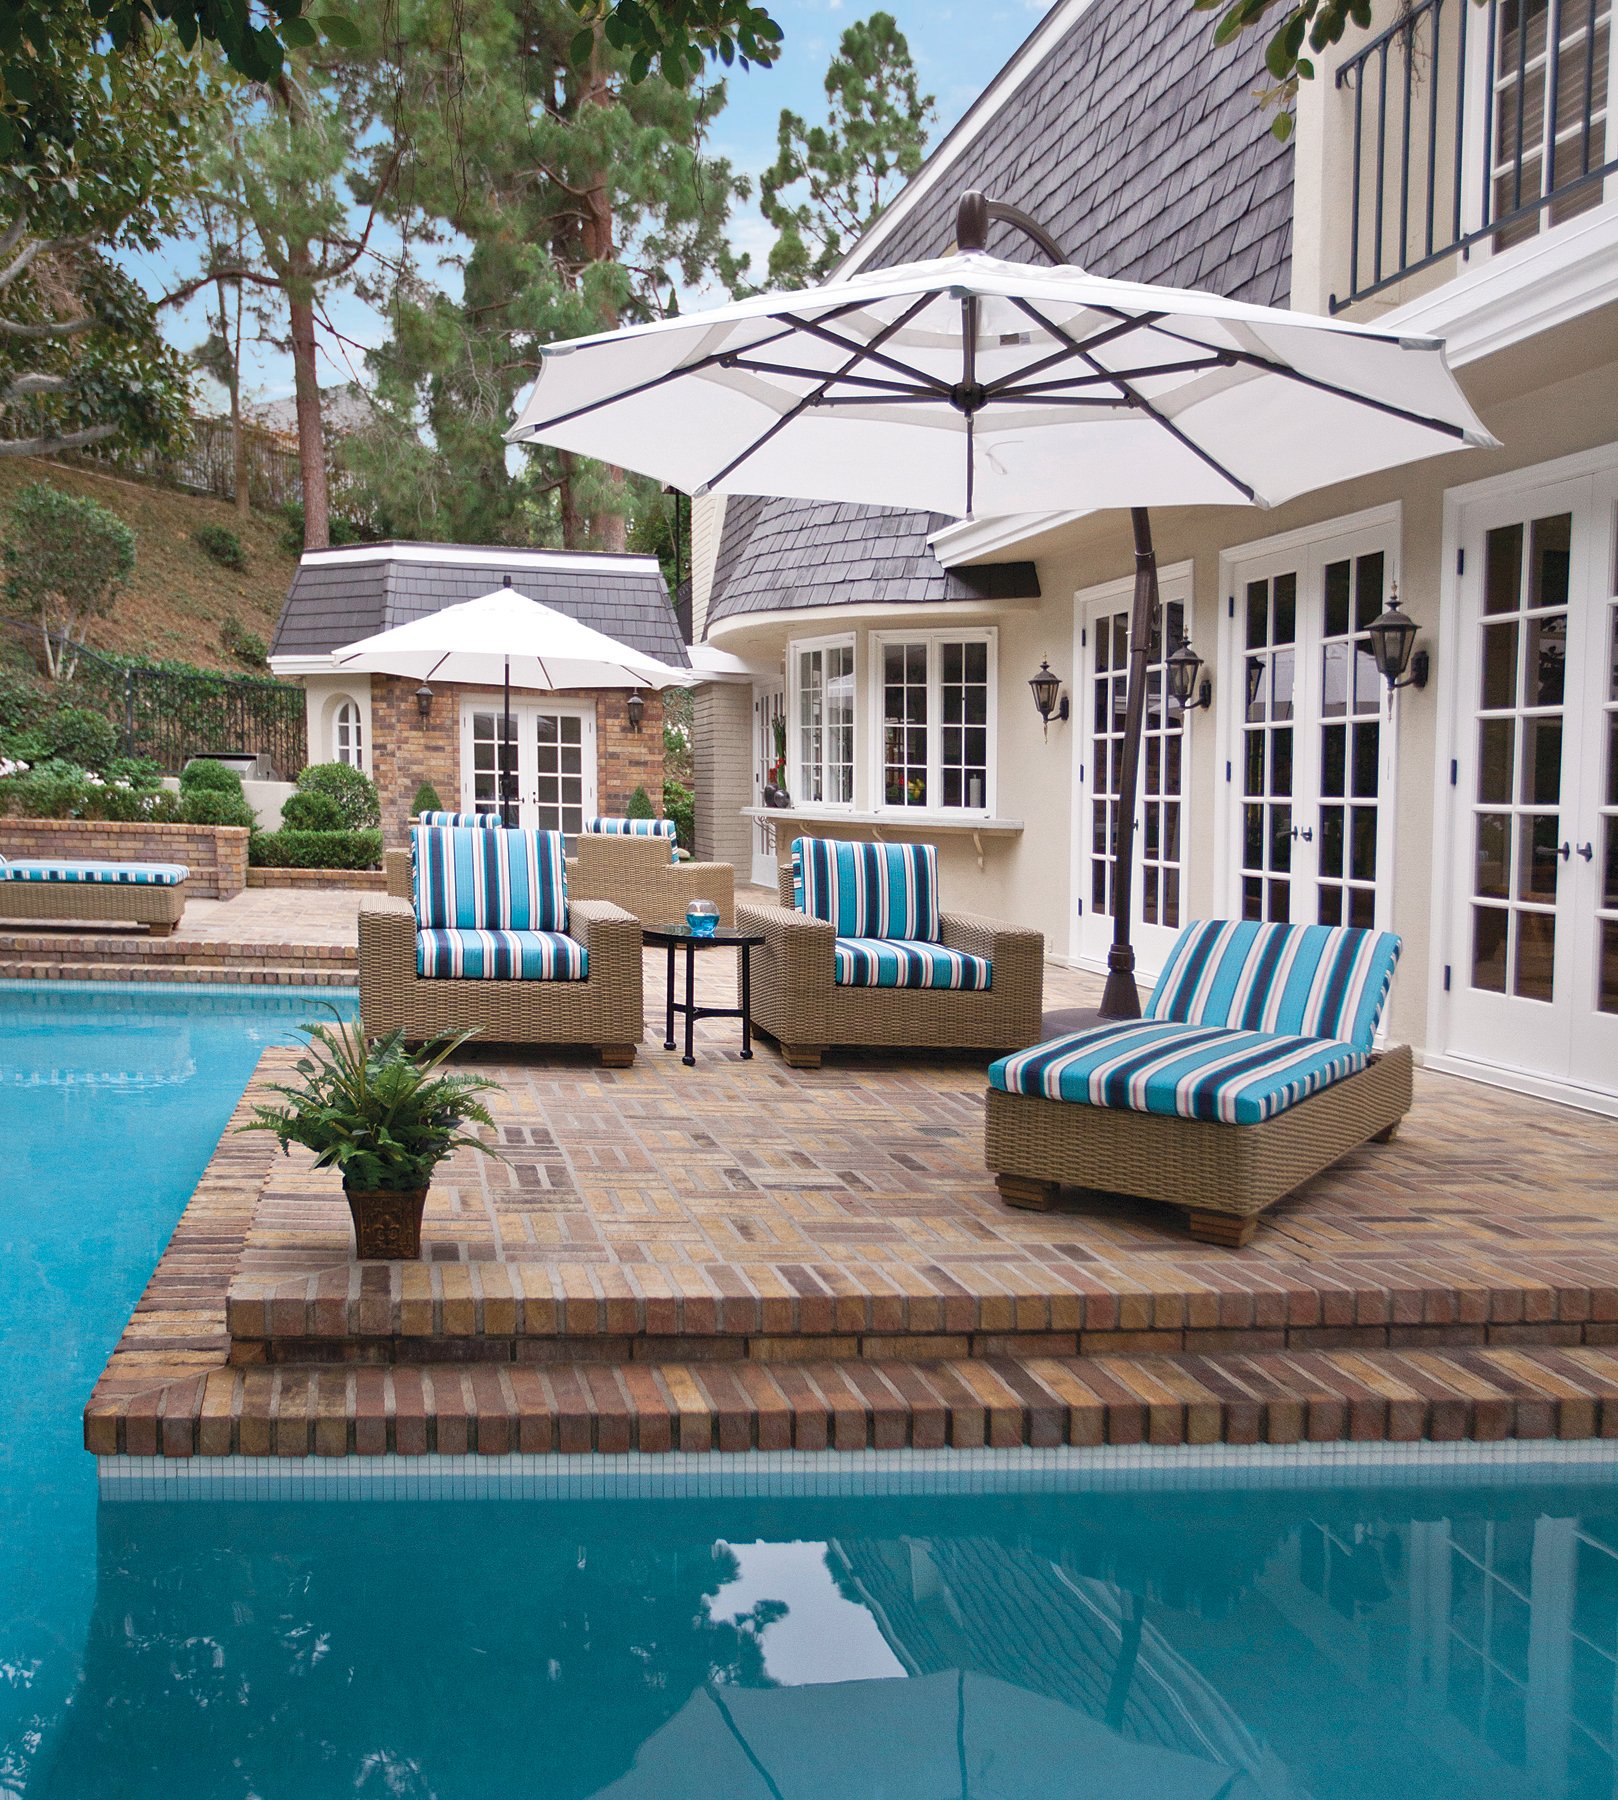 Pool Lounge Chairs, Patio Bistro Sets and outdoor umbrellas